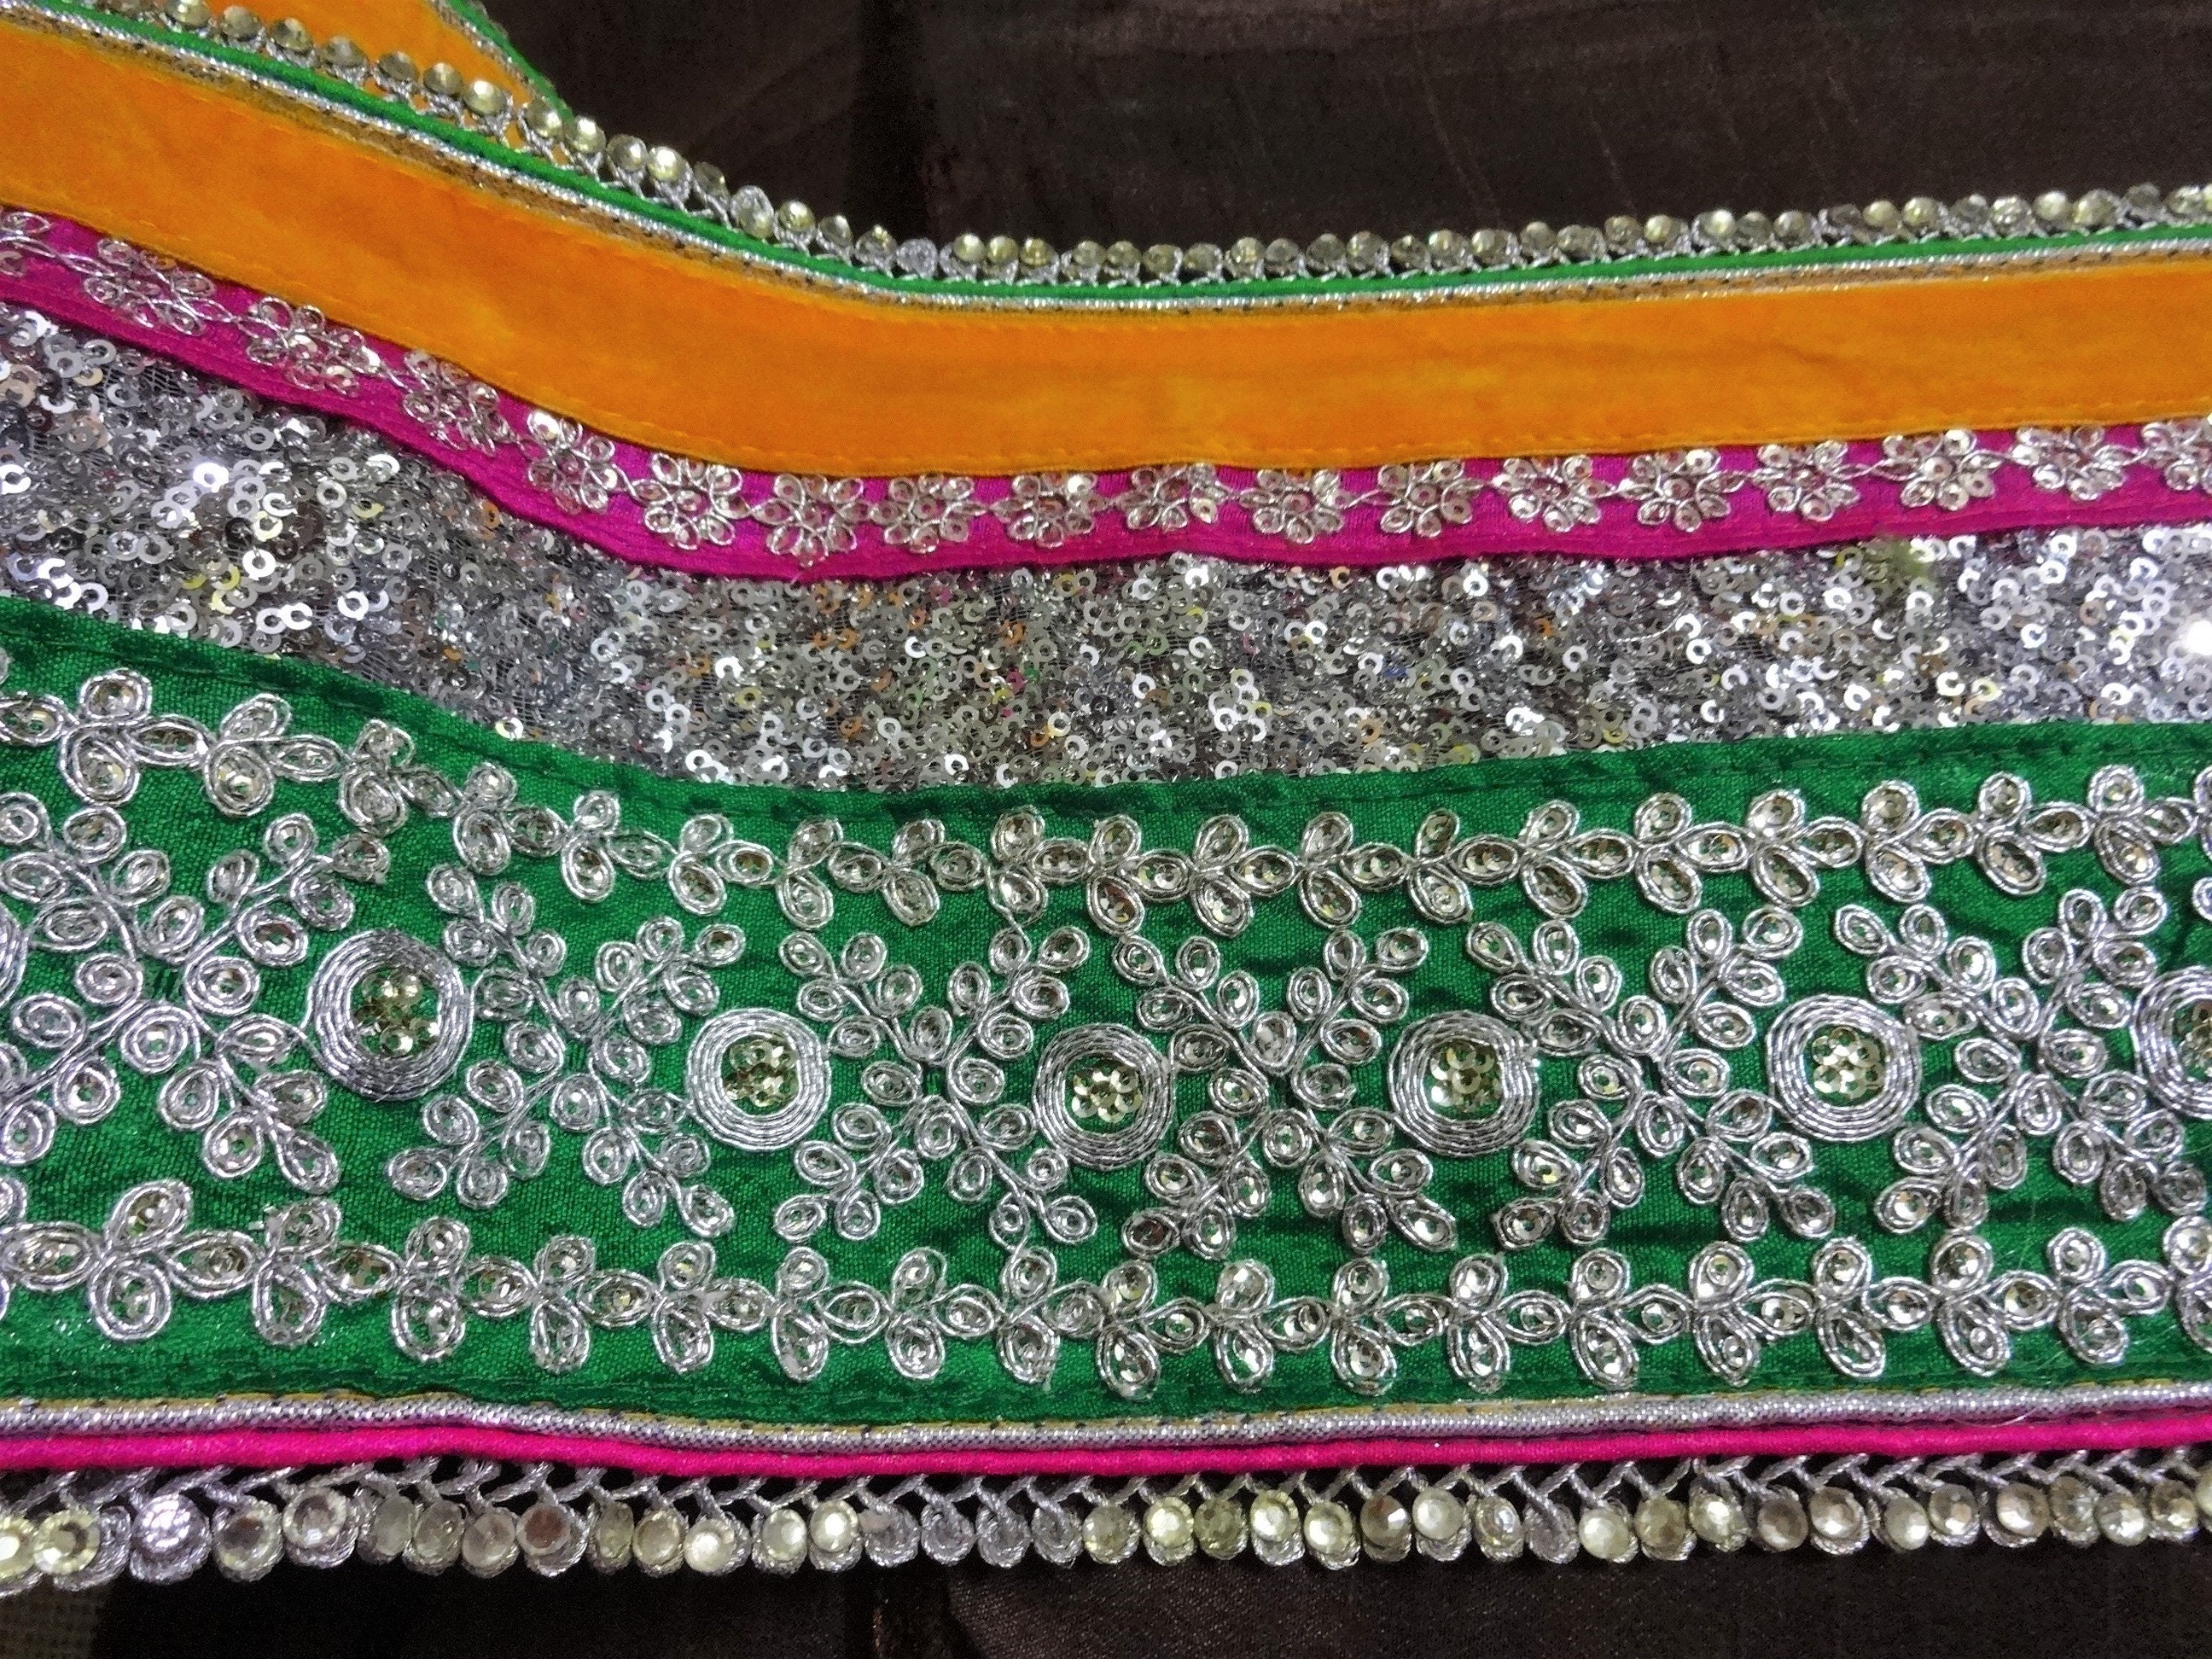 Indian Embroidered Lace Broad Trim Decorative Ribbon - Etsy